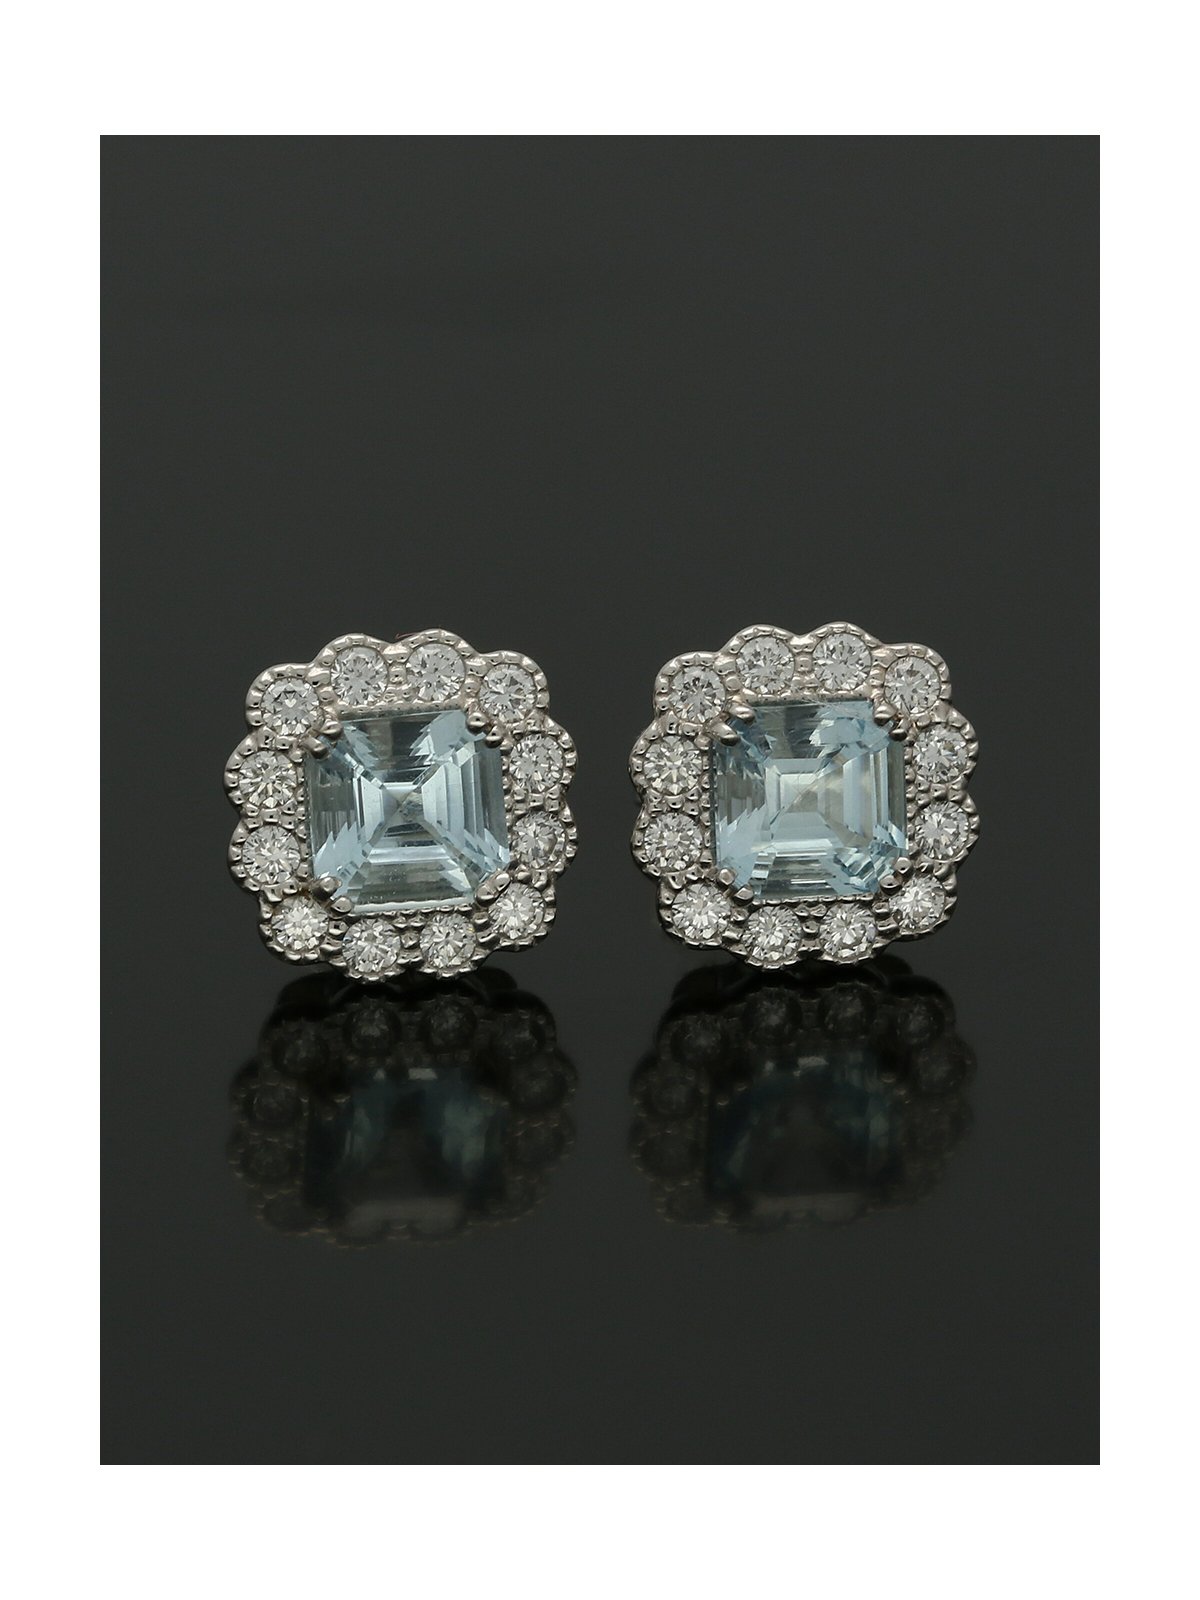 Aqua and Diamond Cluster Stud Earrings in 18ct White Gold